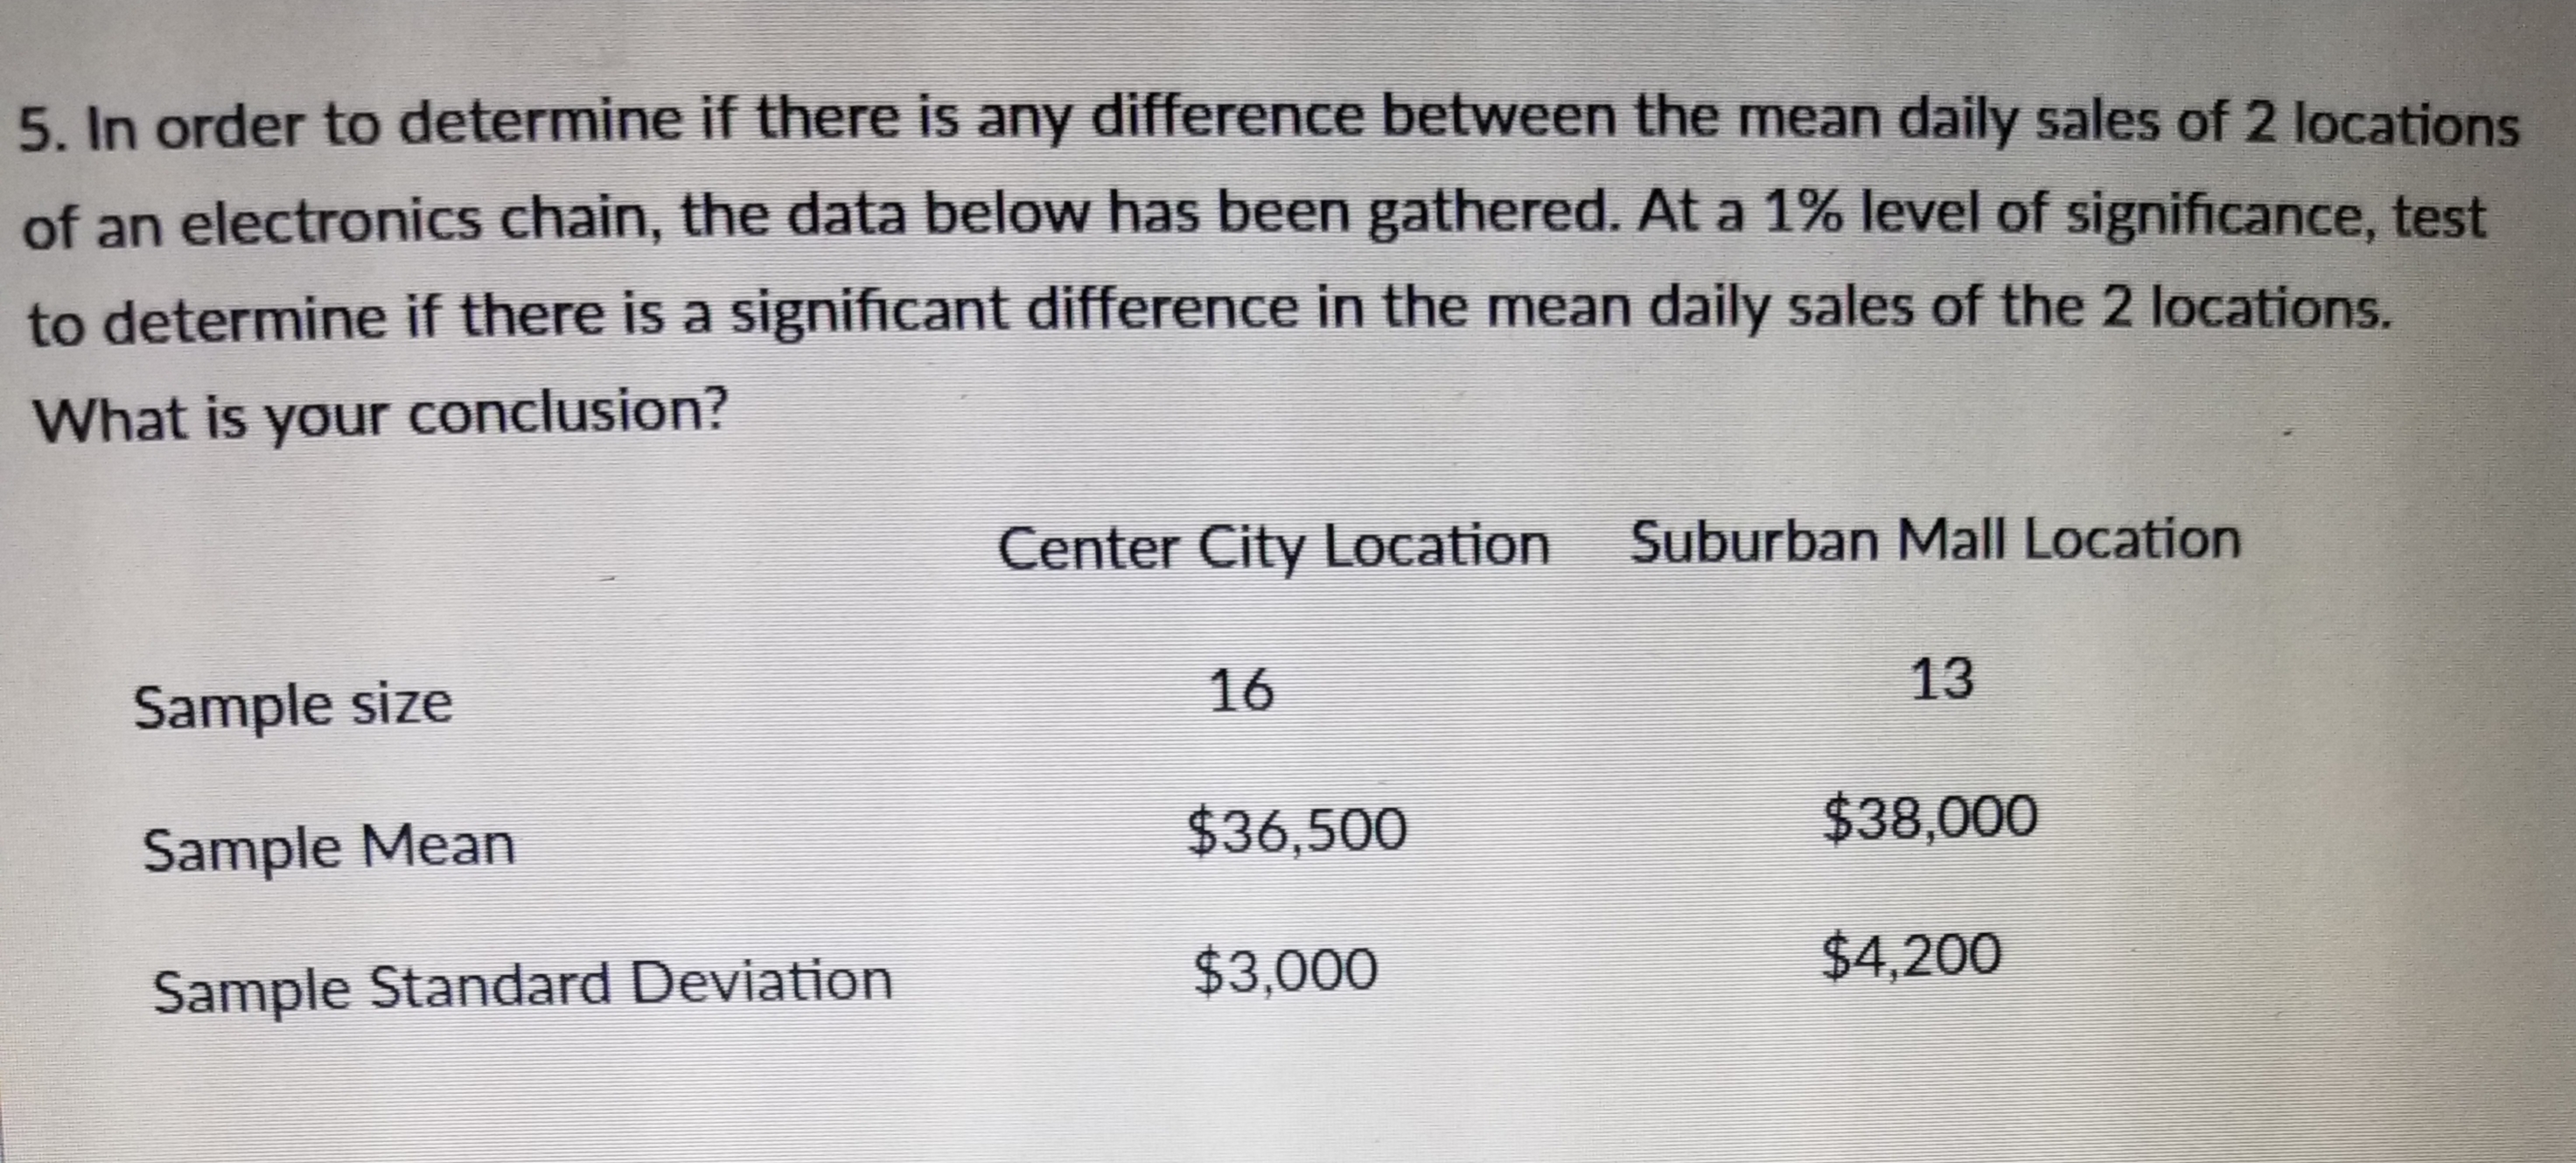 5. In order to determine if there is any difference between the mean daily sales of 2 locations
of an electronics chain, the data below has been gathered. At a 1% level of significance, test
to determine if there is a significant difference in the mean daily sales of the 2 locations.
What is your conclusion?
Center City Location
Suburban Mall Location
13
$38,000
Sample size
Sample Mean
Sample Standard Deviation
16
$36,500
$3,000
$4,200
